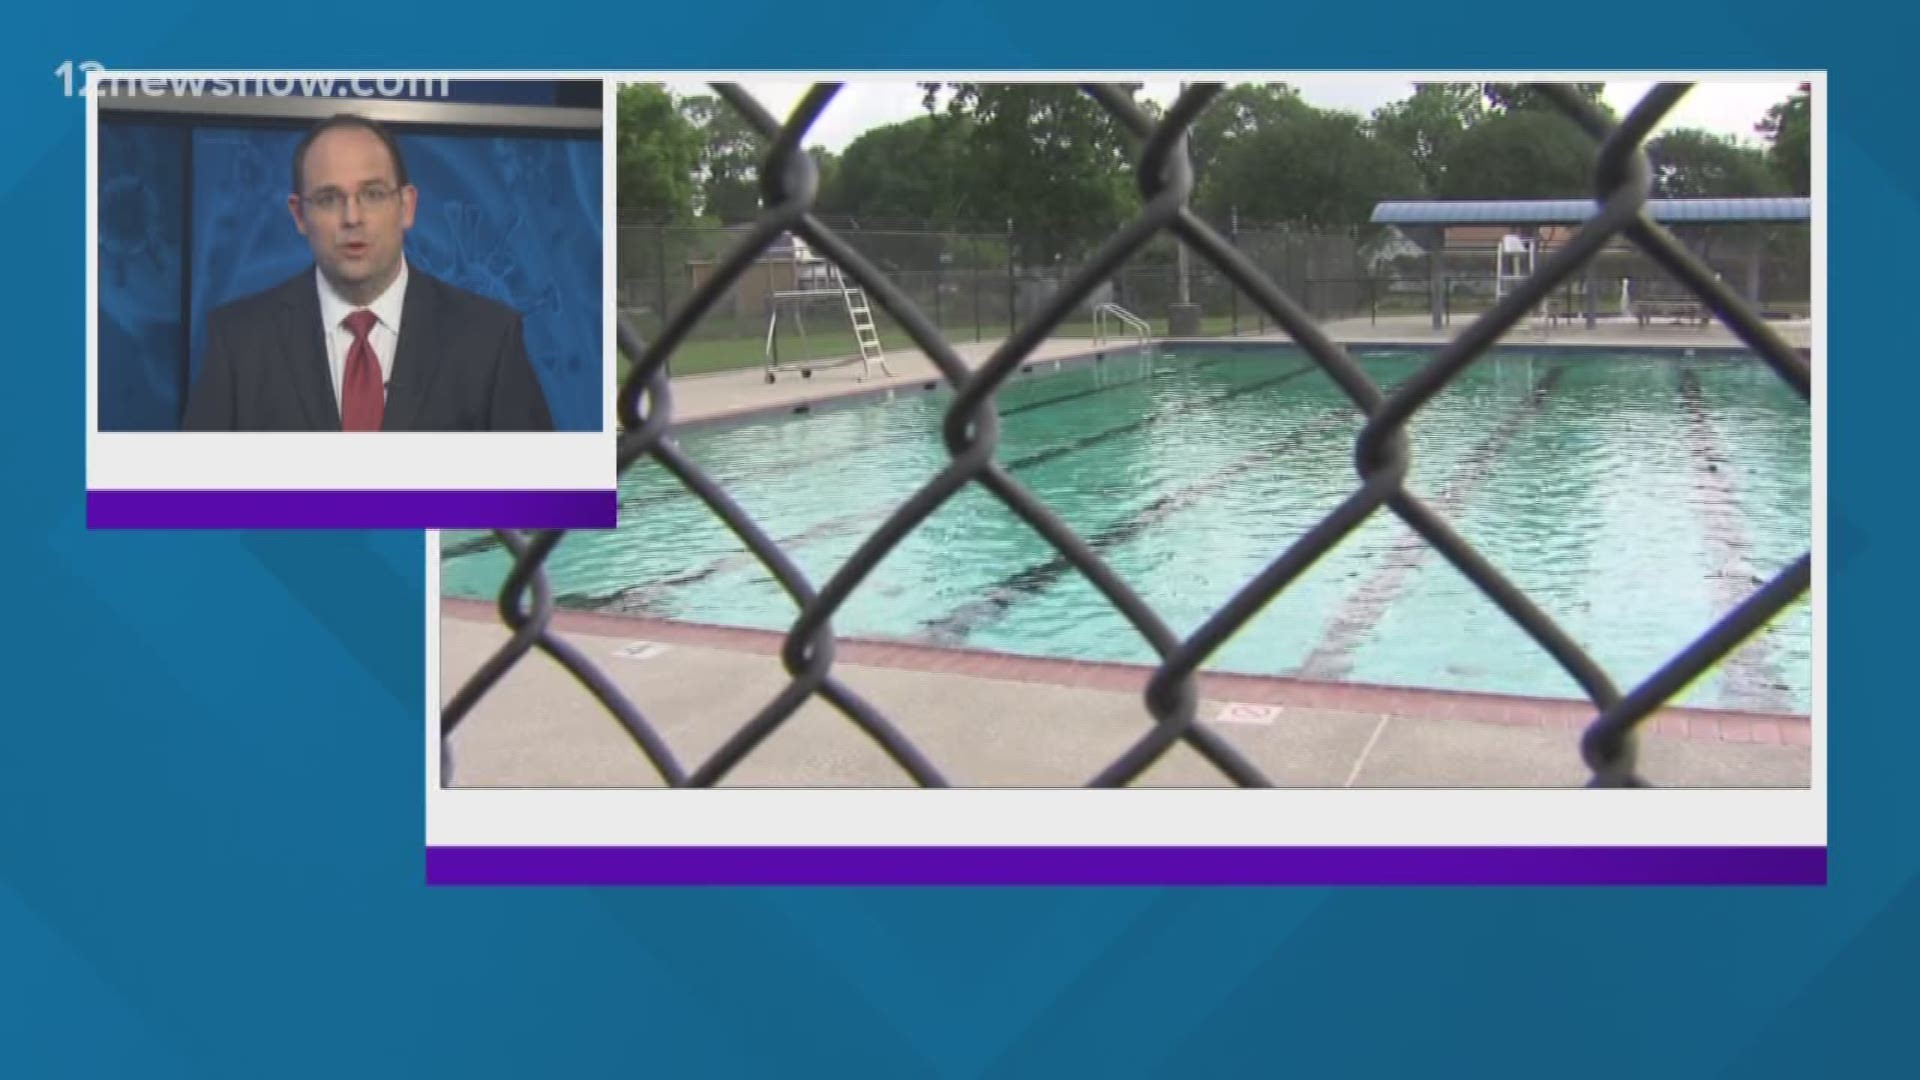 Beaumont city pools will remain closed this summer, the city manager said. The public health director thinks this would be best due to COVID-19.